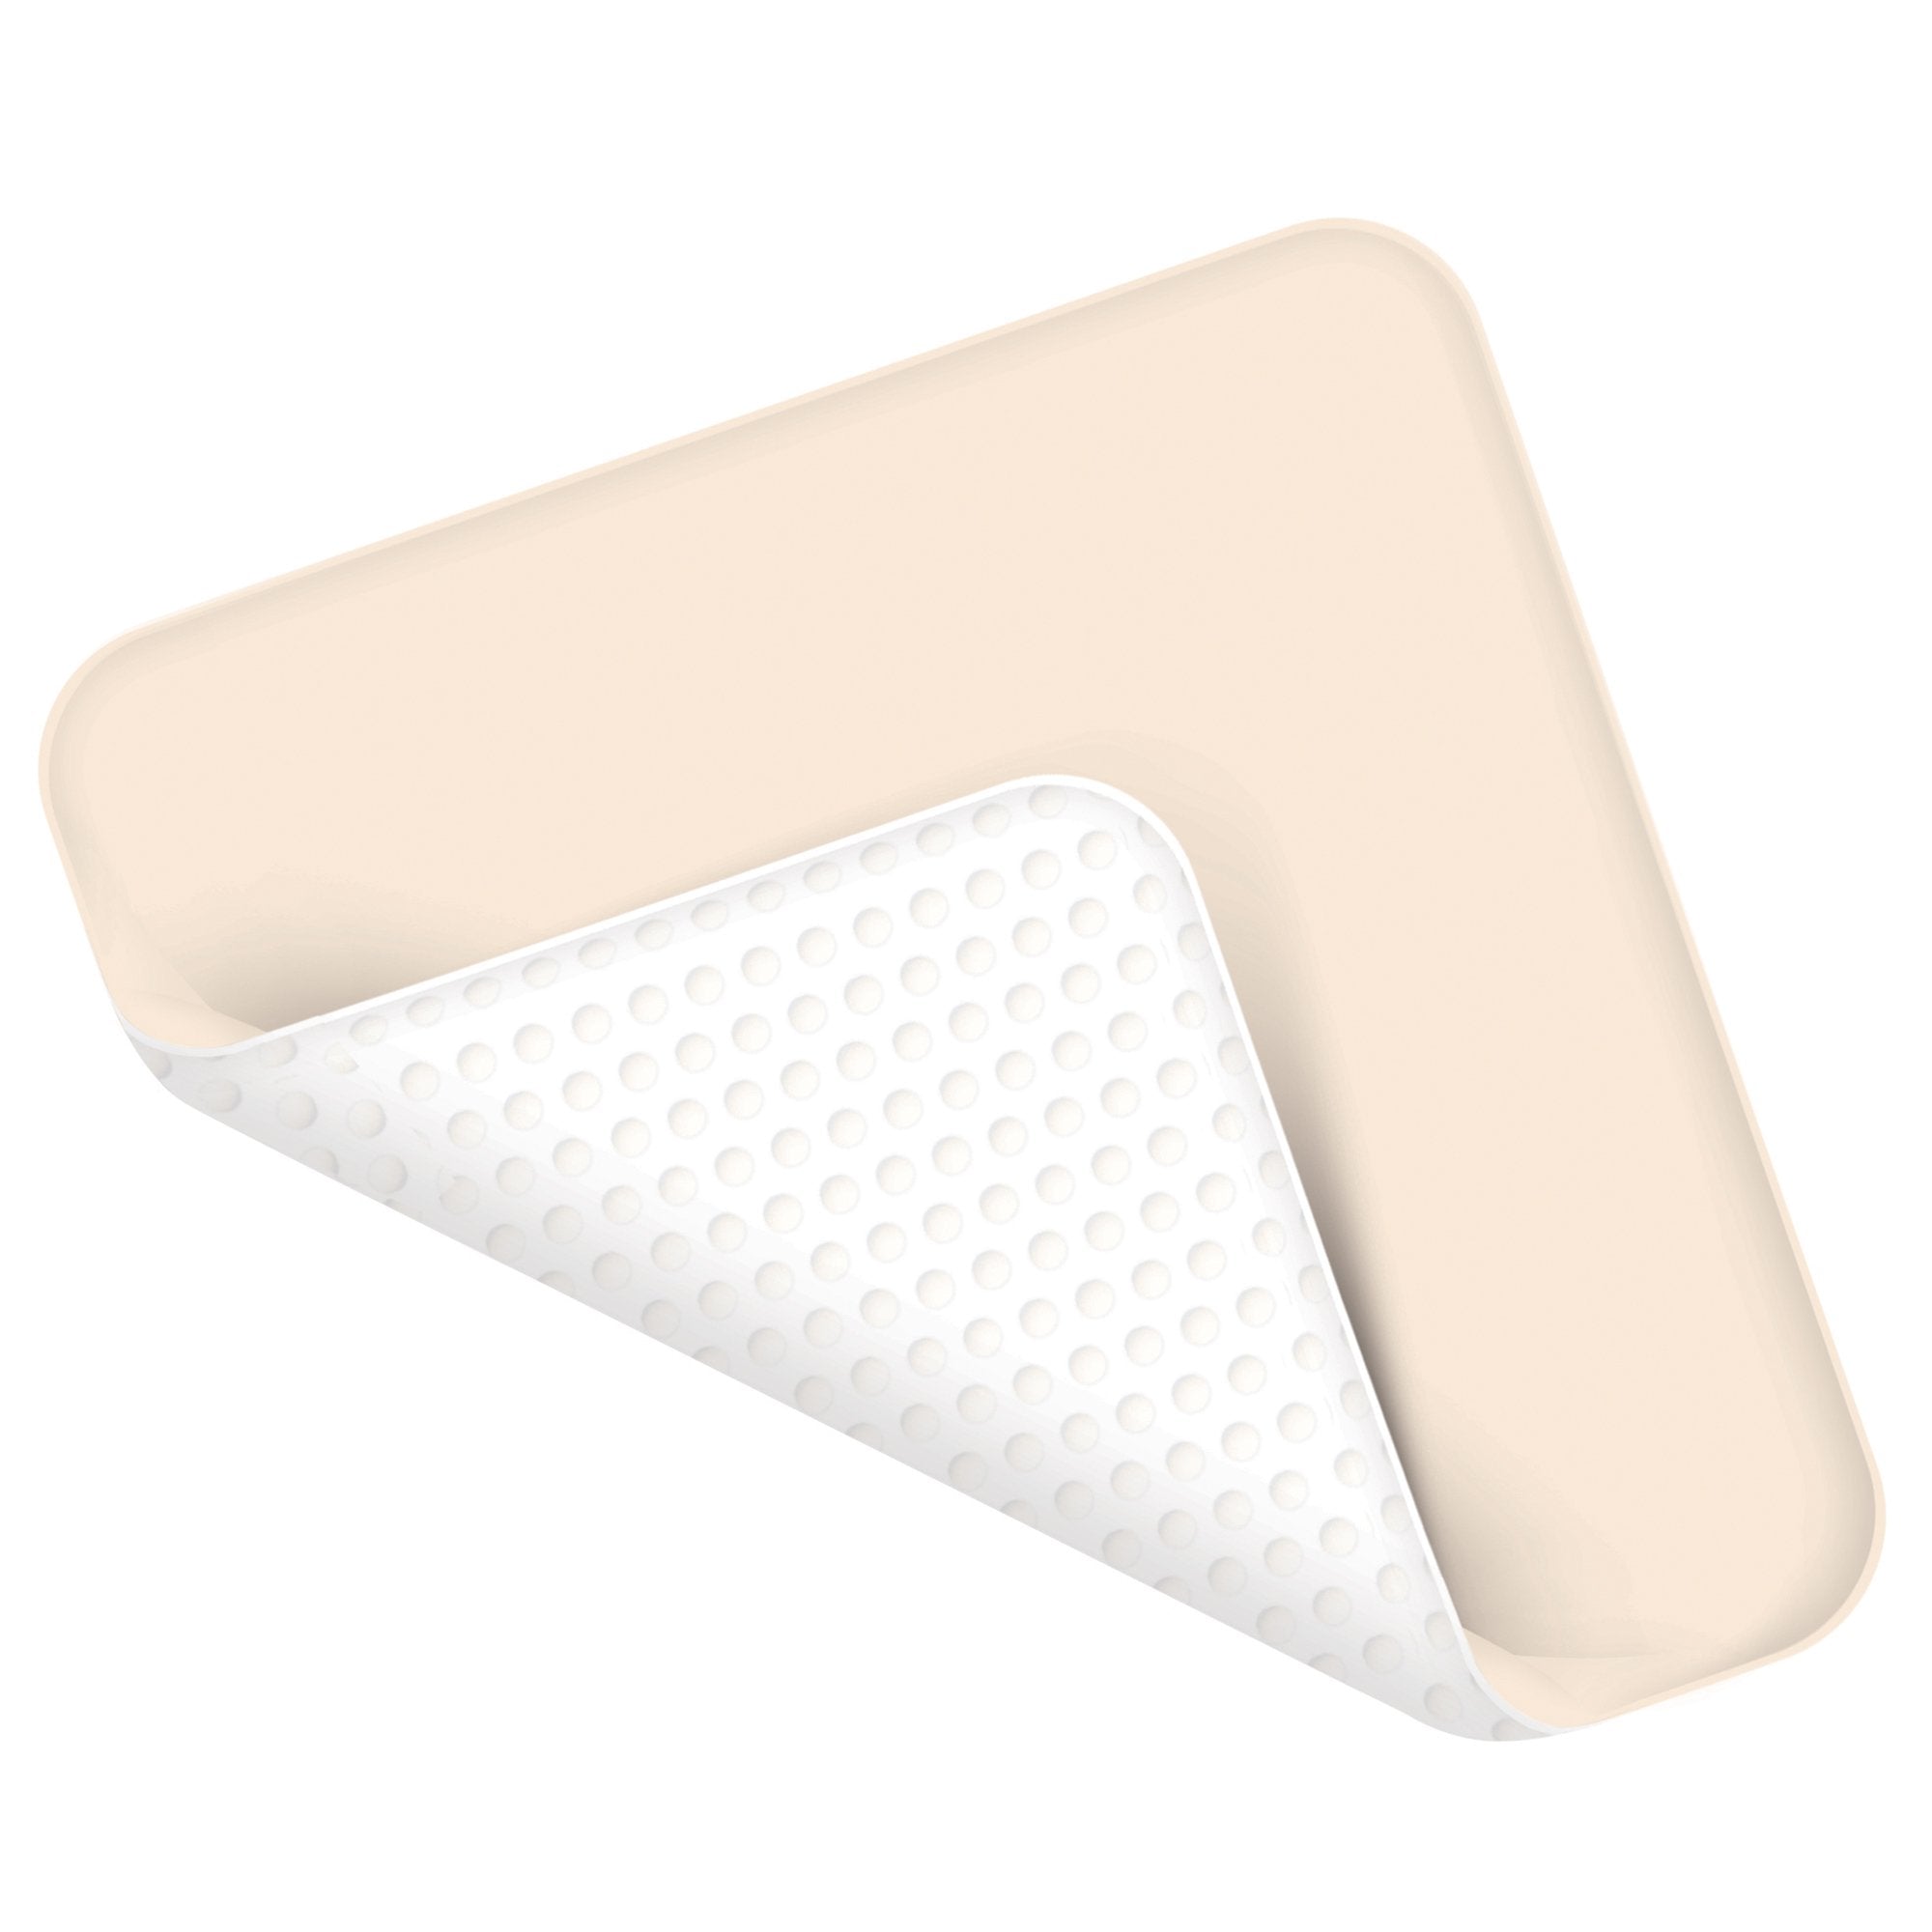 Foam Dressing Proximel® Non-Border 4 X 4 Inch Without Border Waterproof Backing Silicone Face Square Sterile